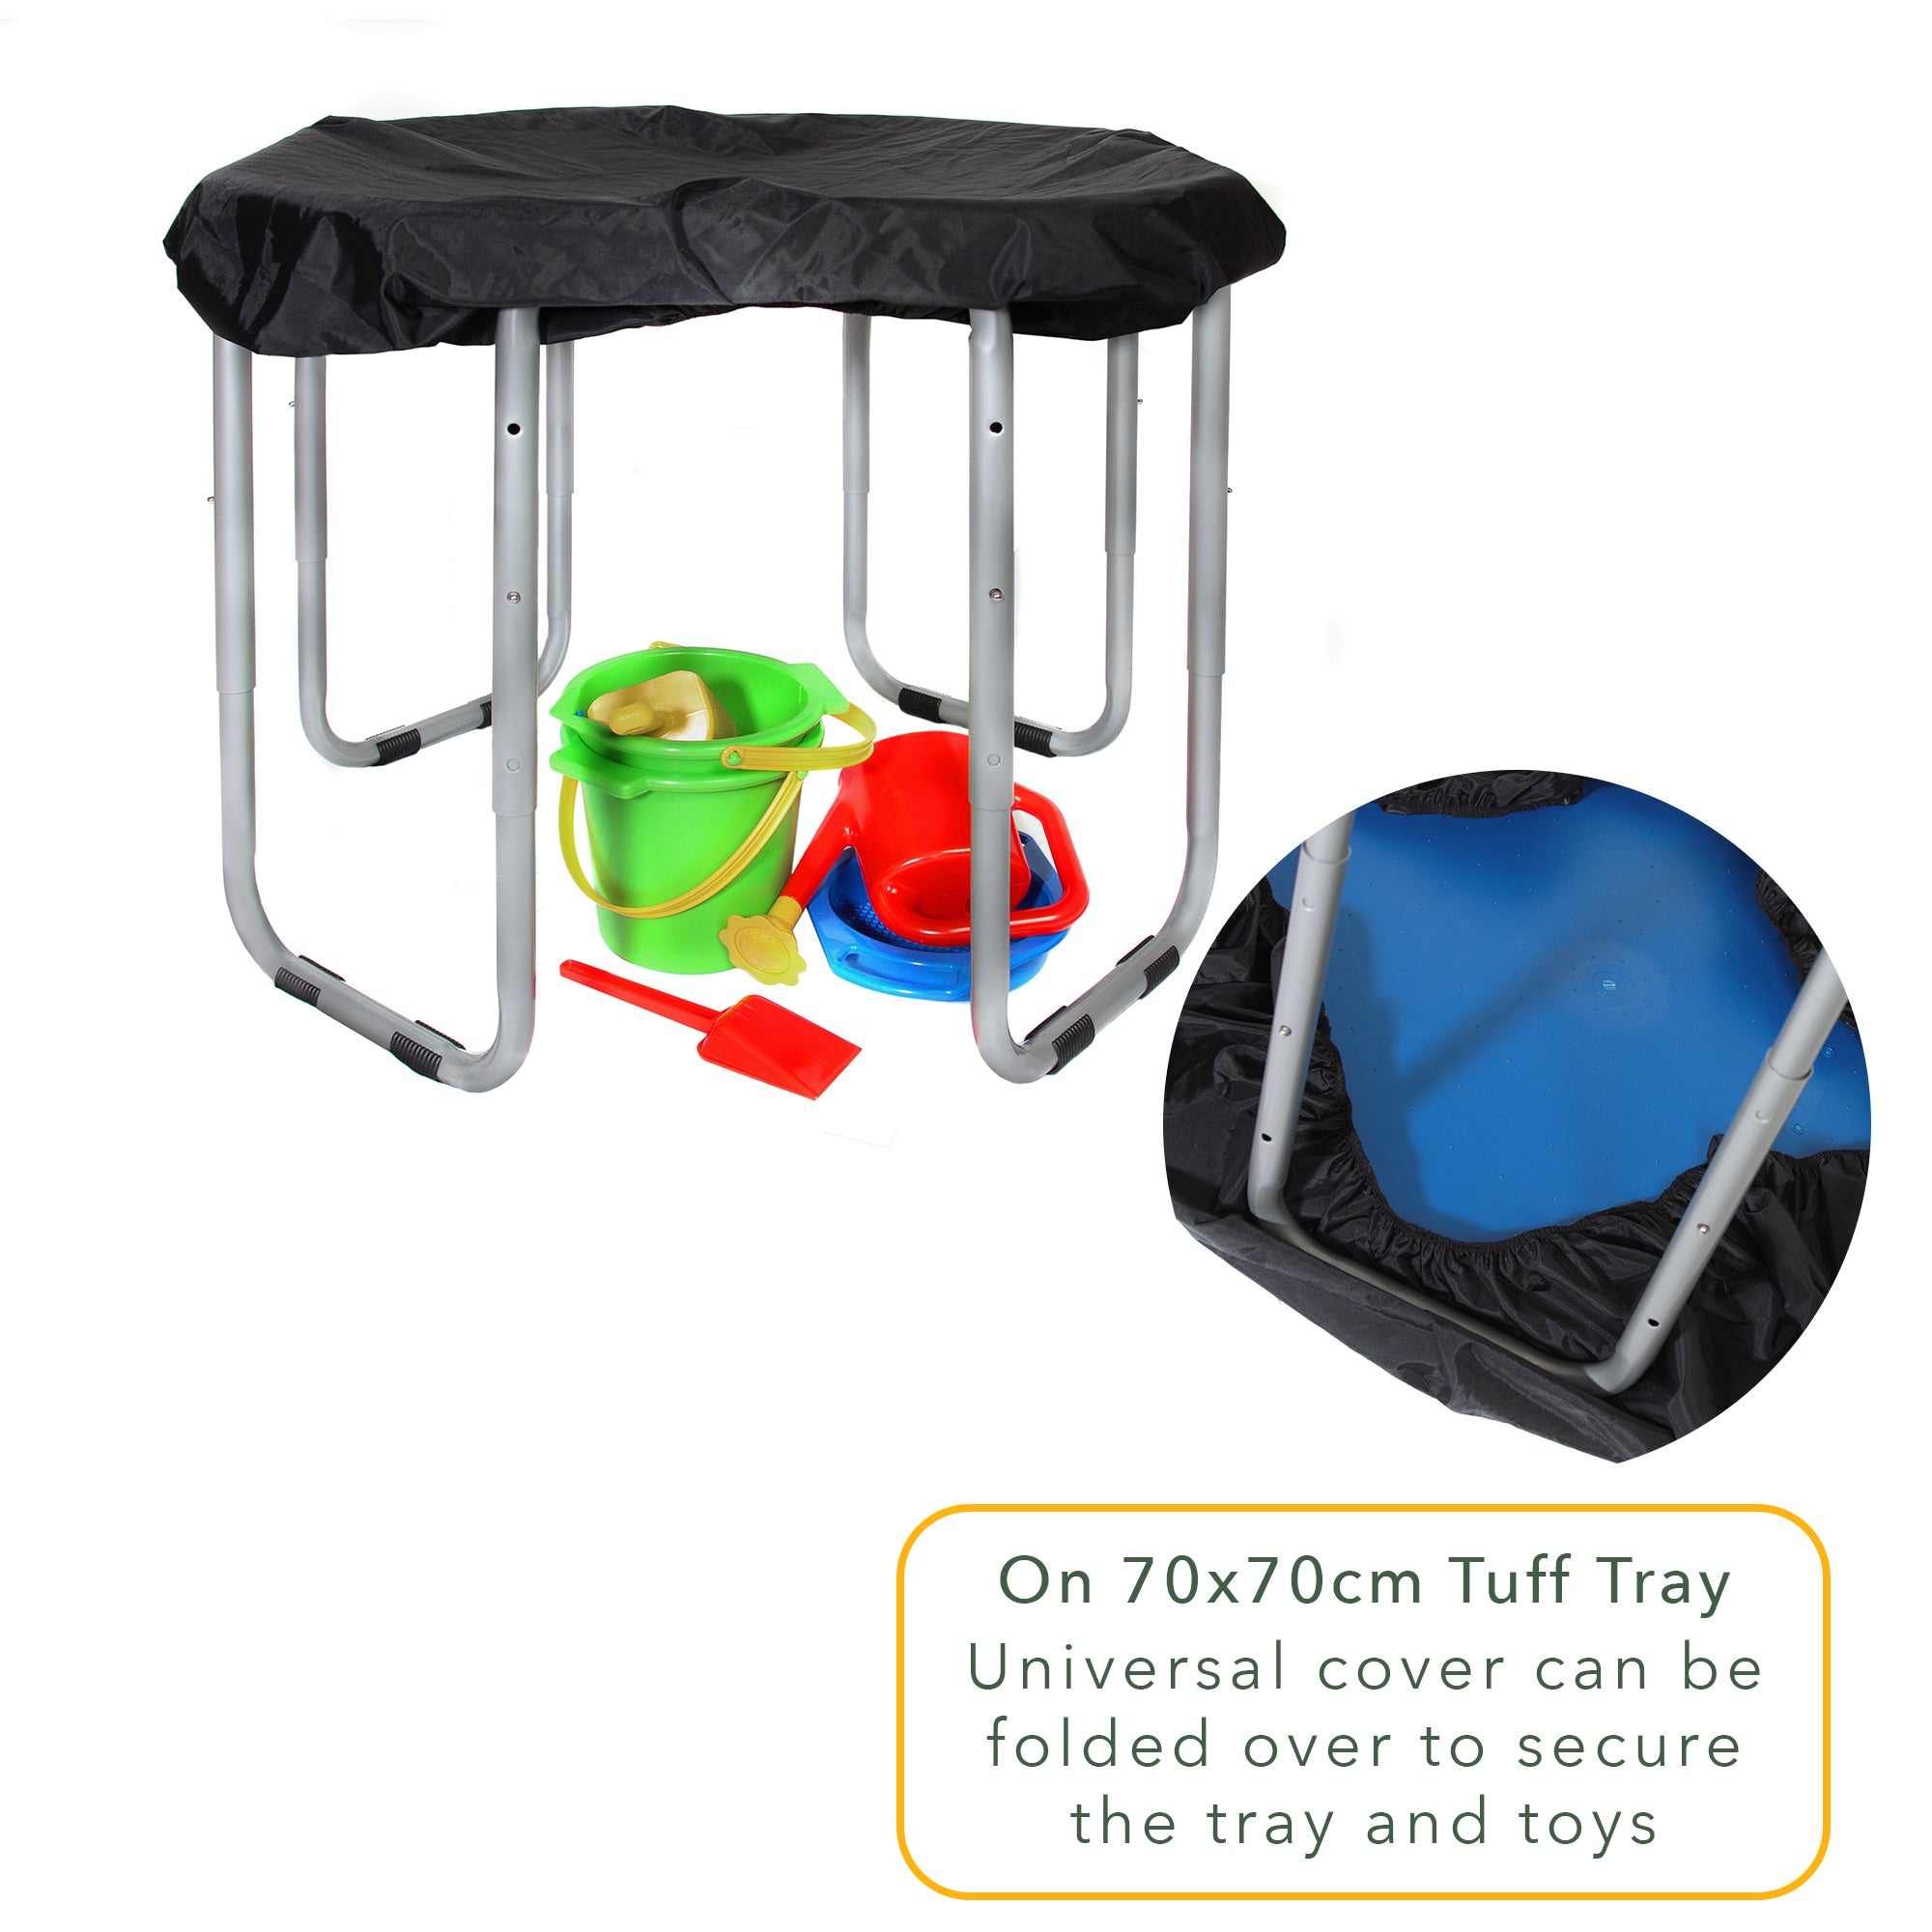 XL BUNDLE PACK - Original XL Tuff Tray, XL Stand, and Universal Waterproof  Cover Pack - 3 Colour Options